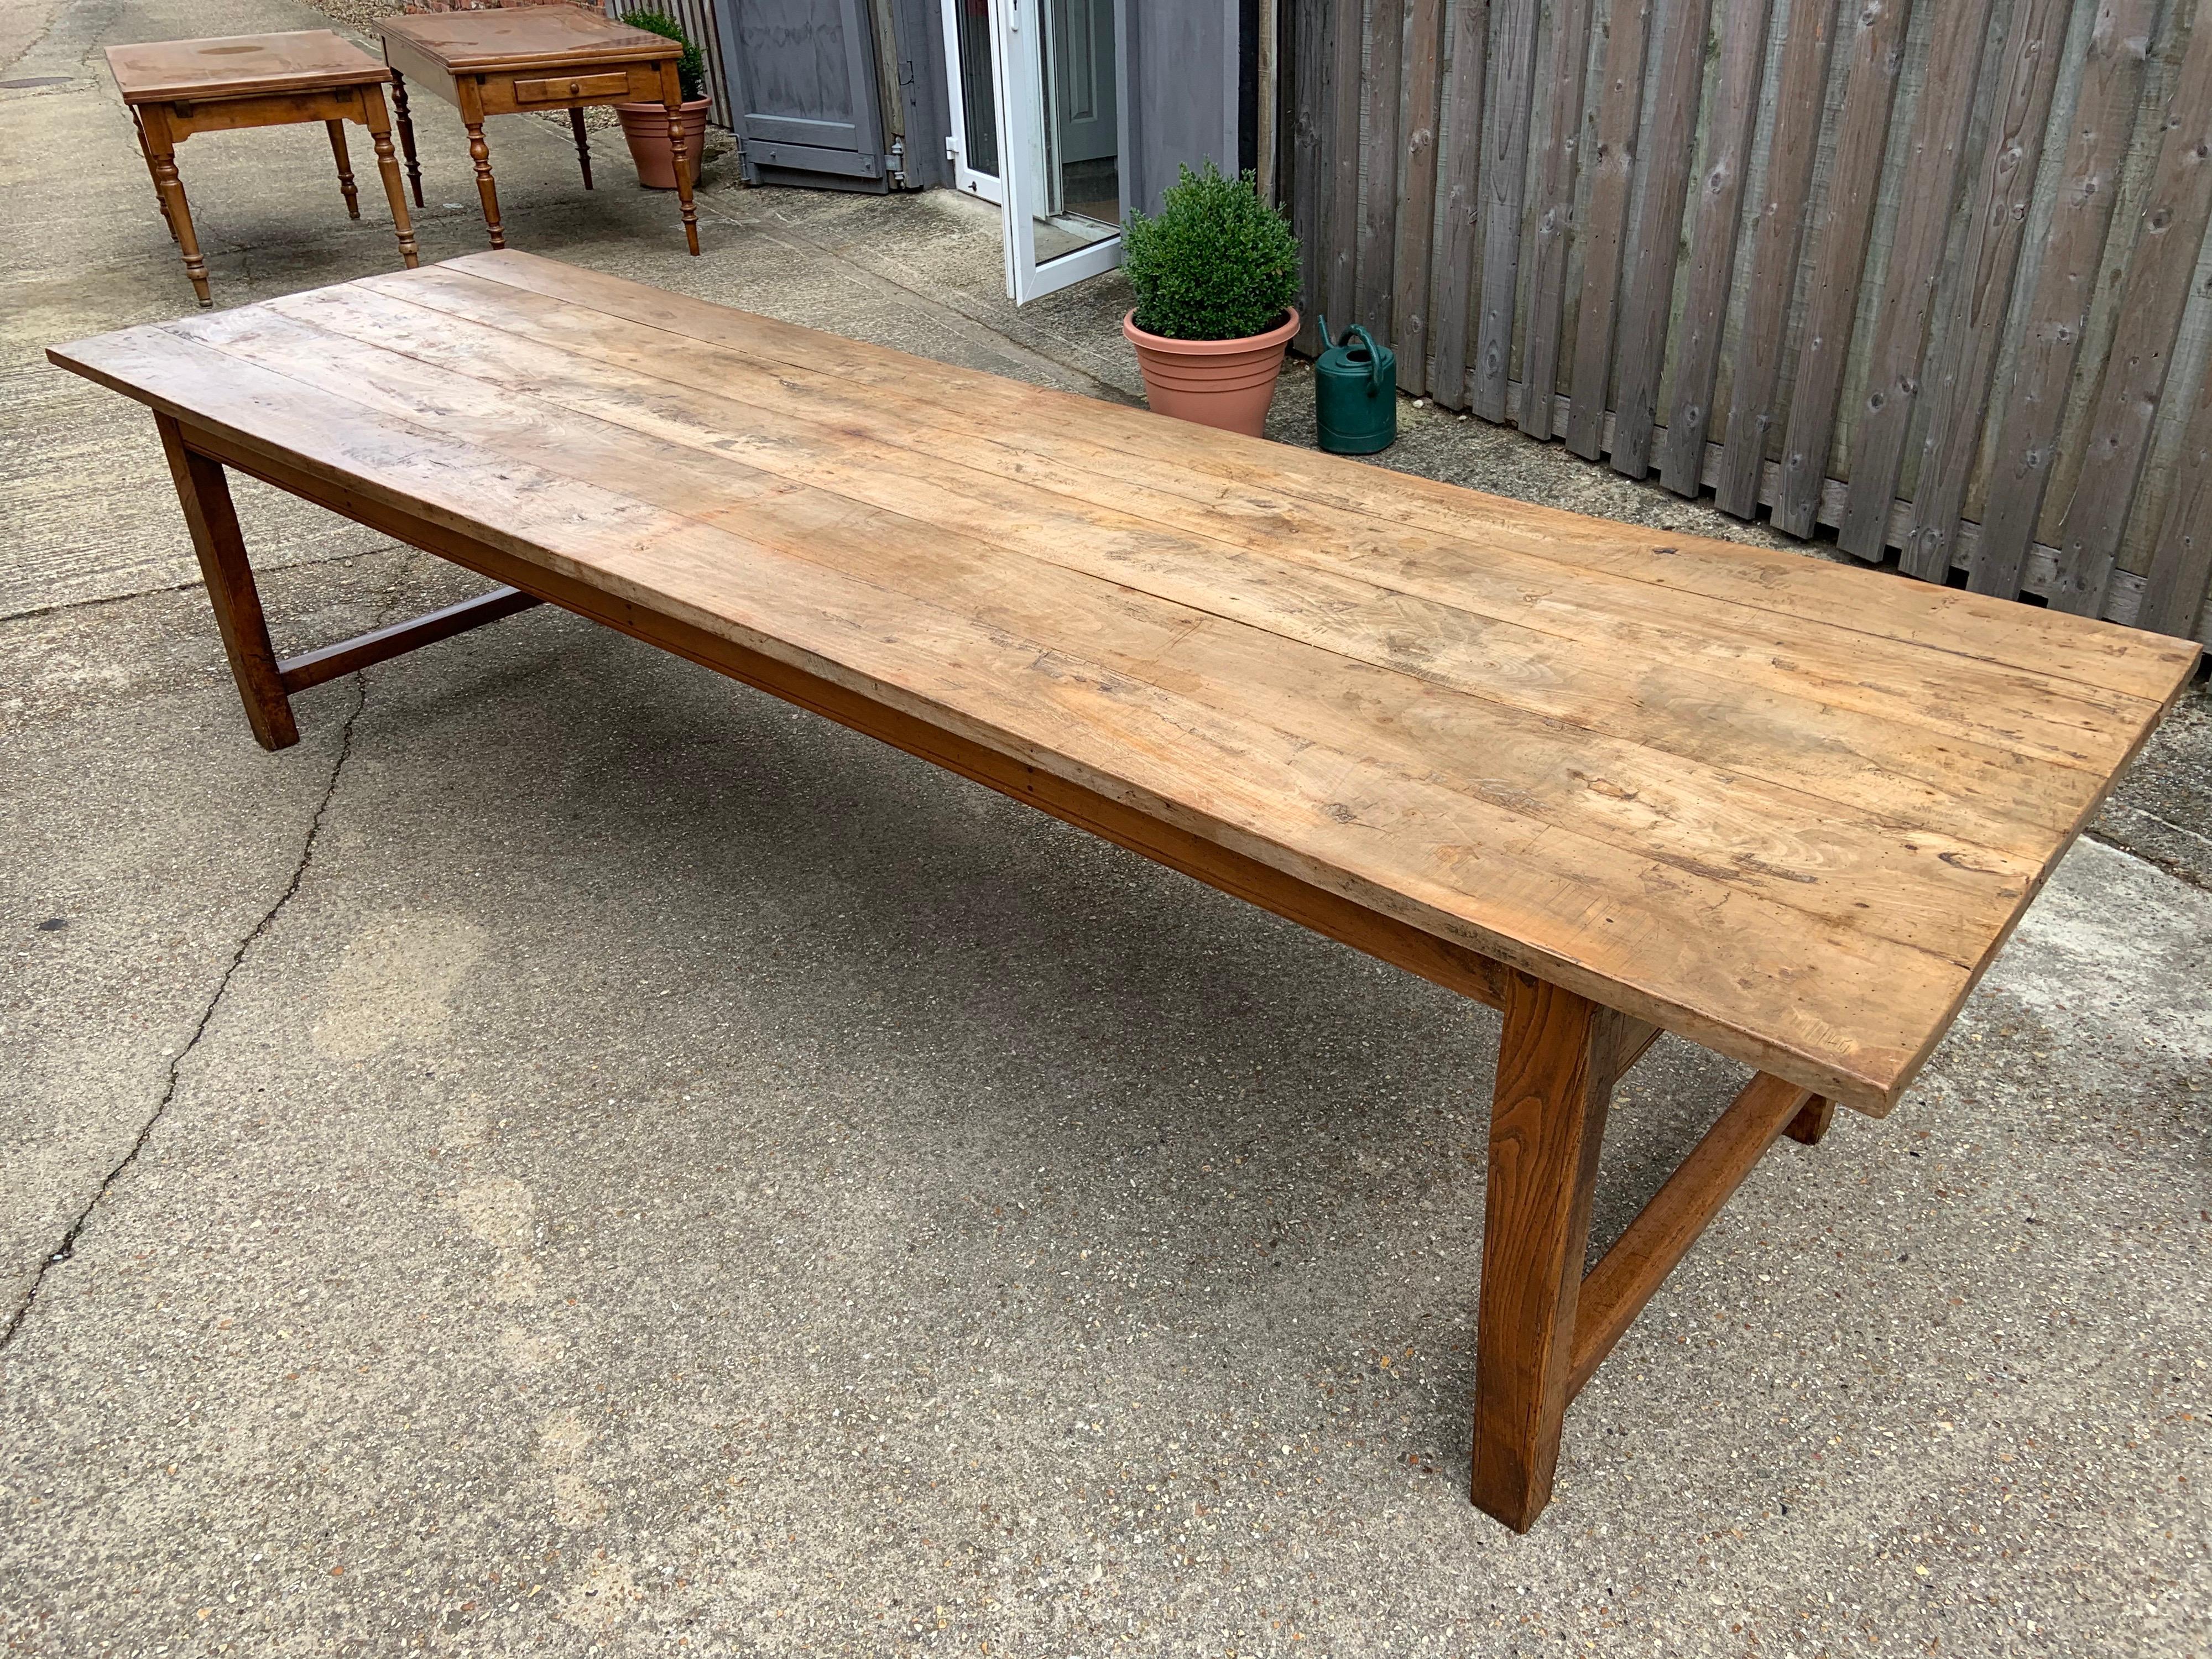 Large pale rustic elm farmhouse table with sturdy end H stretcher and large end drawer. Rustic five plank top with gorgeous color. Great proportions on this table. Would seat 12 people comfortably.